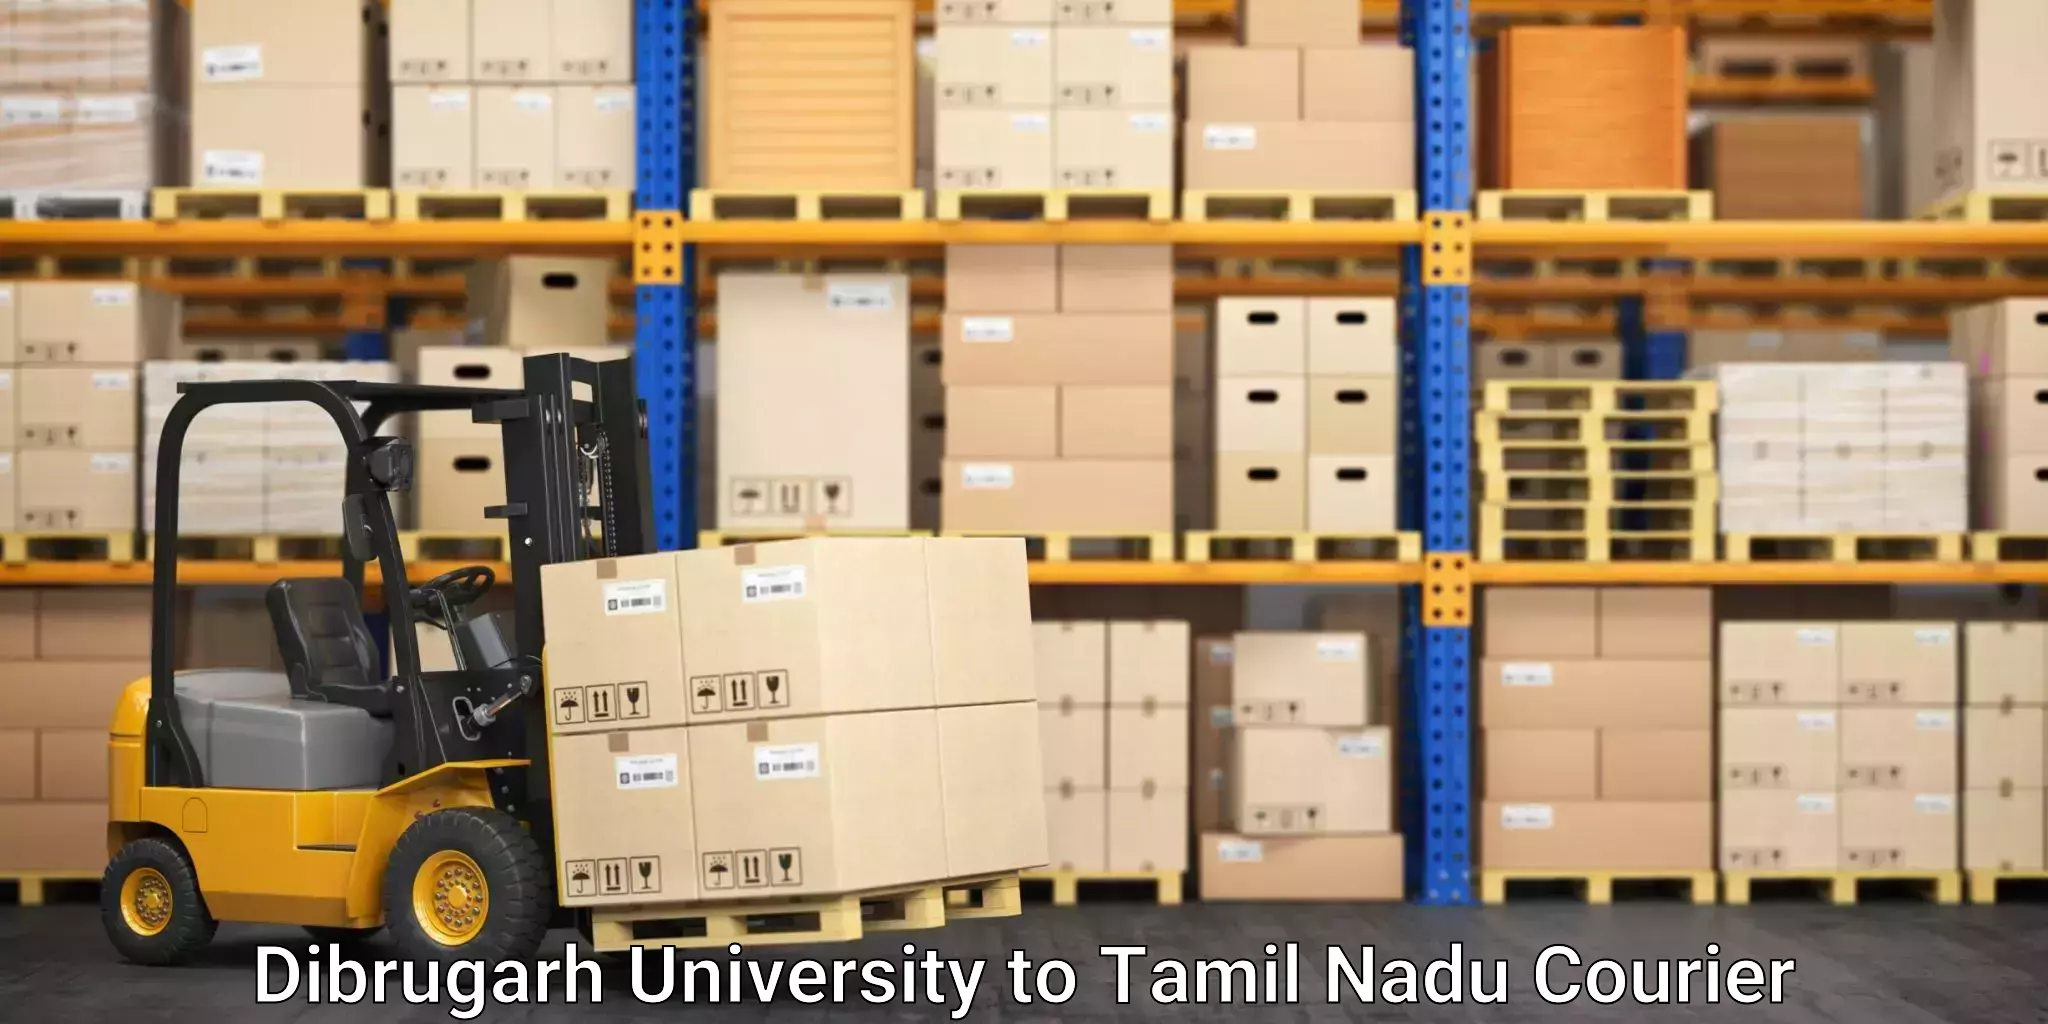 Express package delivery Dibrugarh University to Tamil Nadu